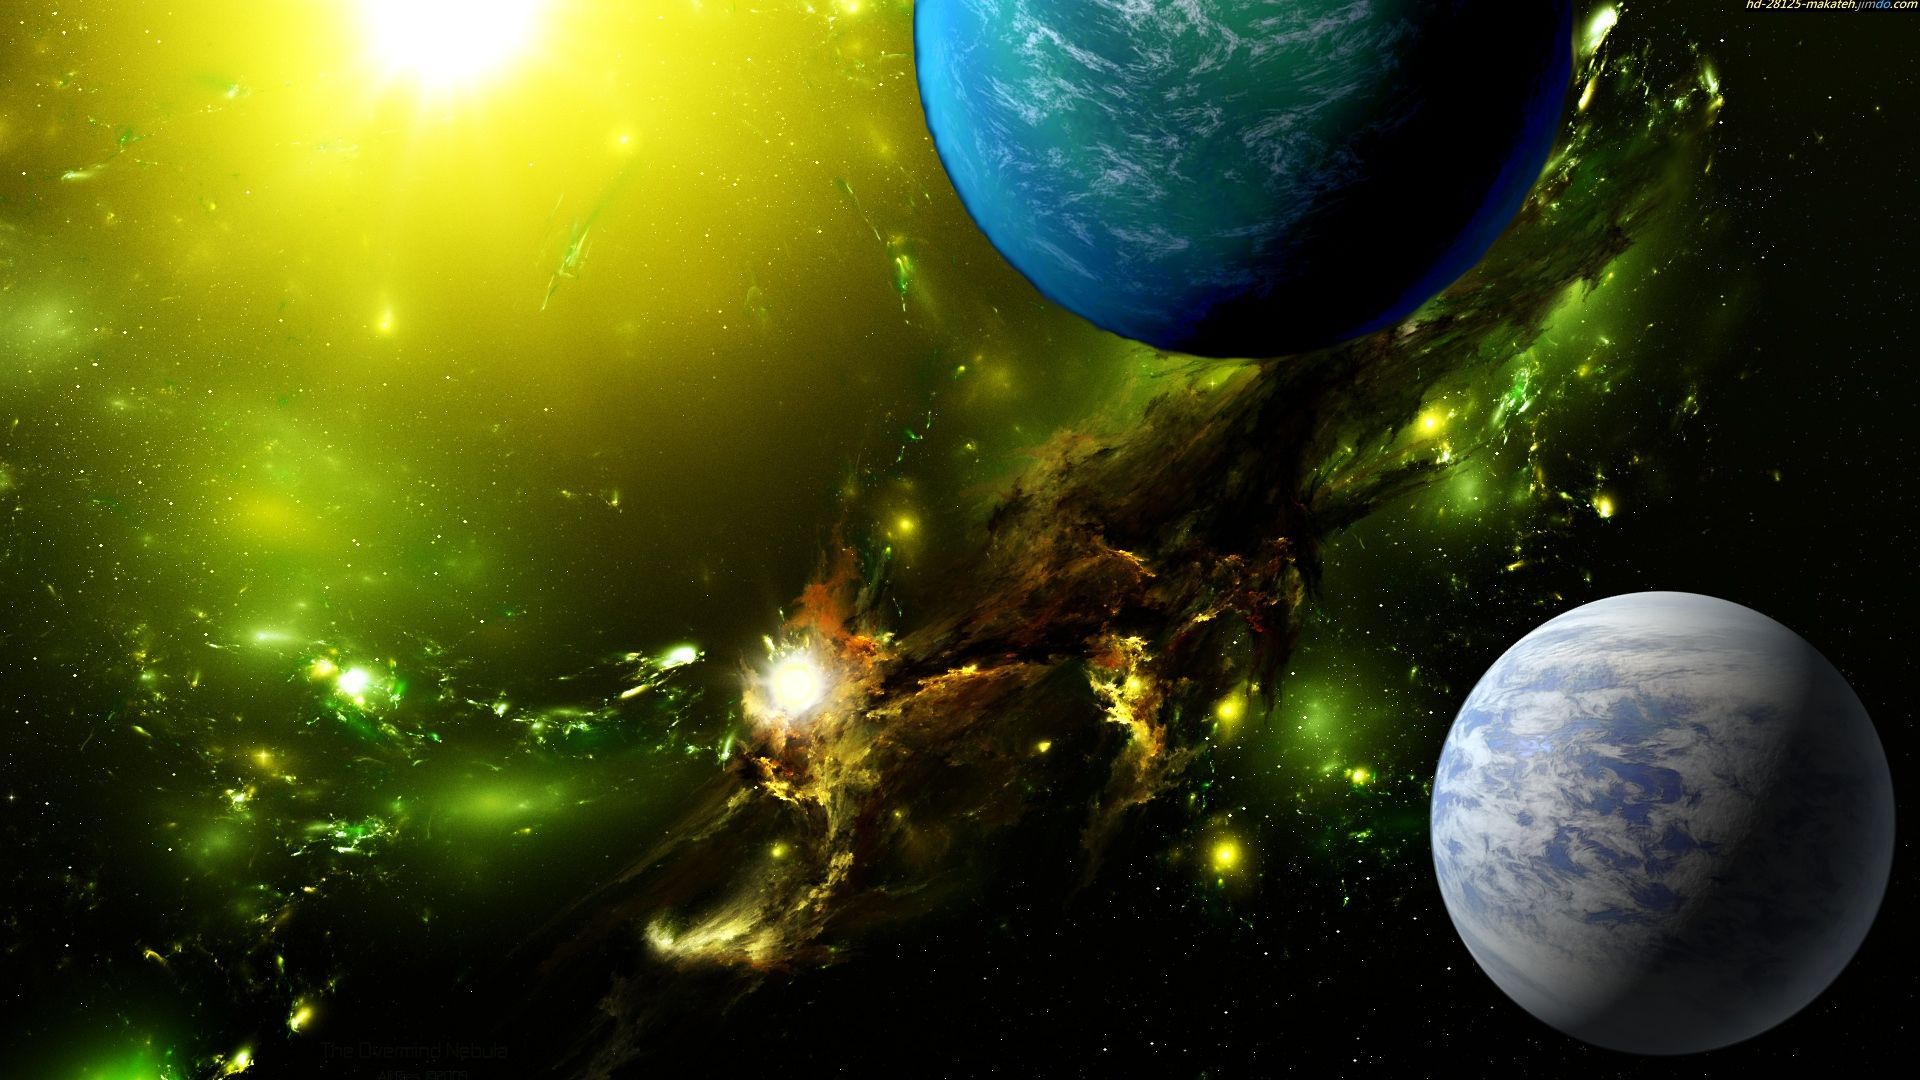 Exoplanets Wallpaper Free Exoplanets Background